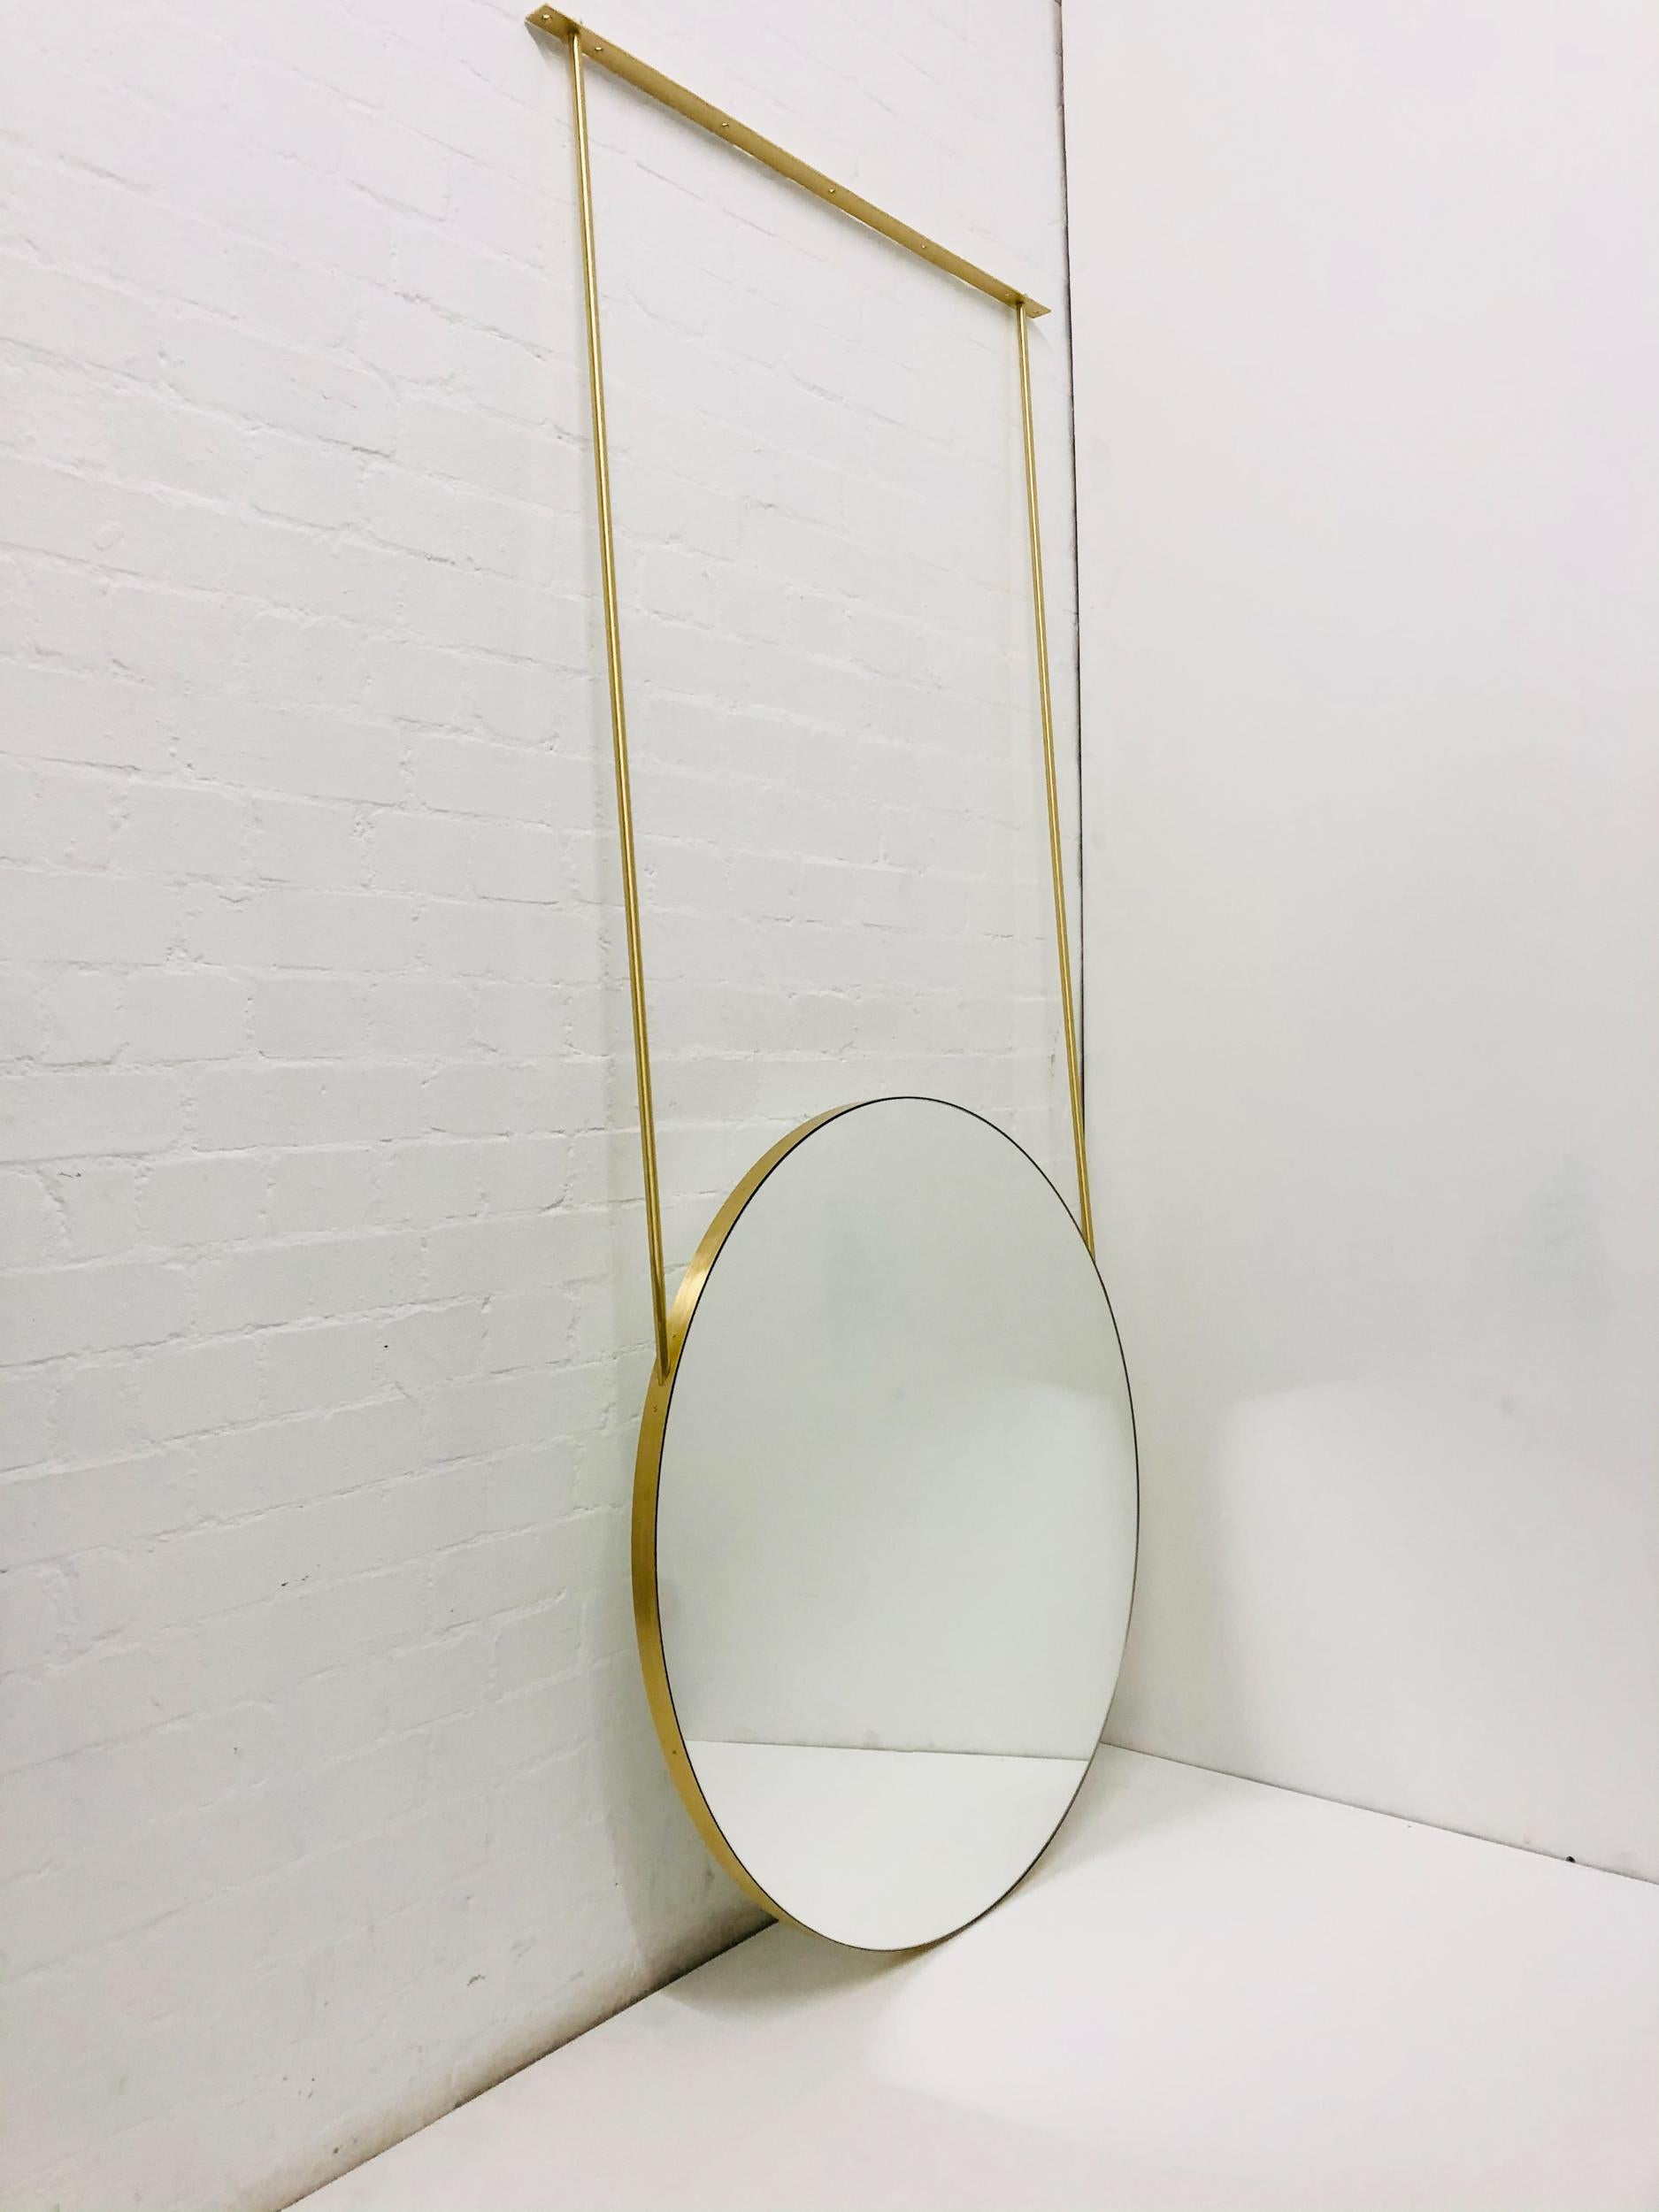 Exquisite modern ceiling suspended double sided round mirror with an elegant solid brushed brass frame. 

Mirror dimensions: 914mm (36